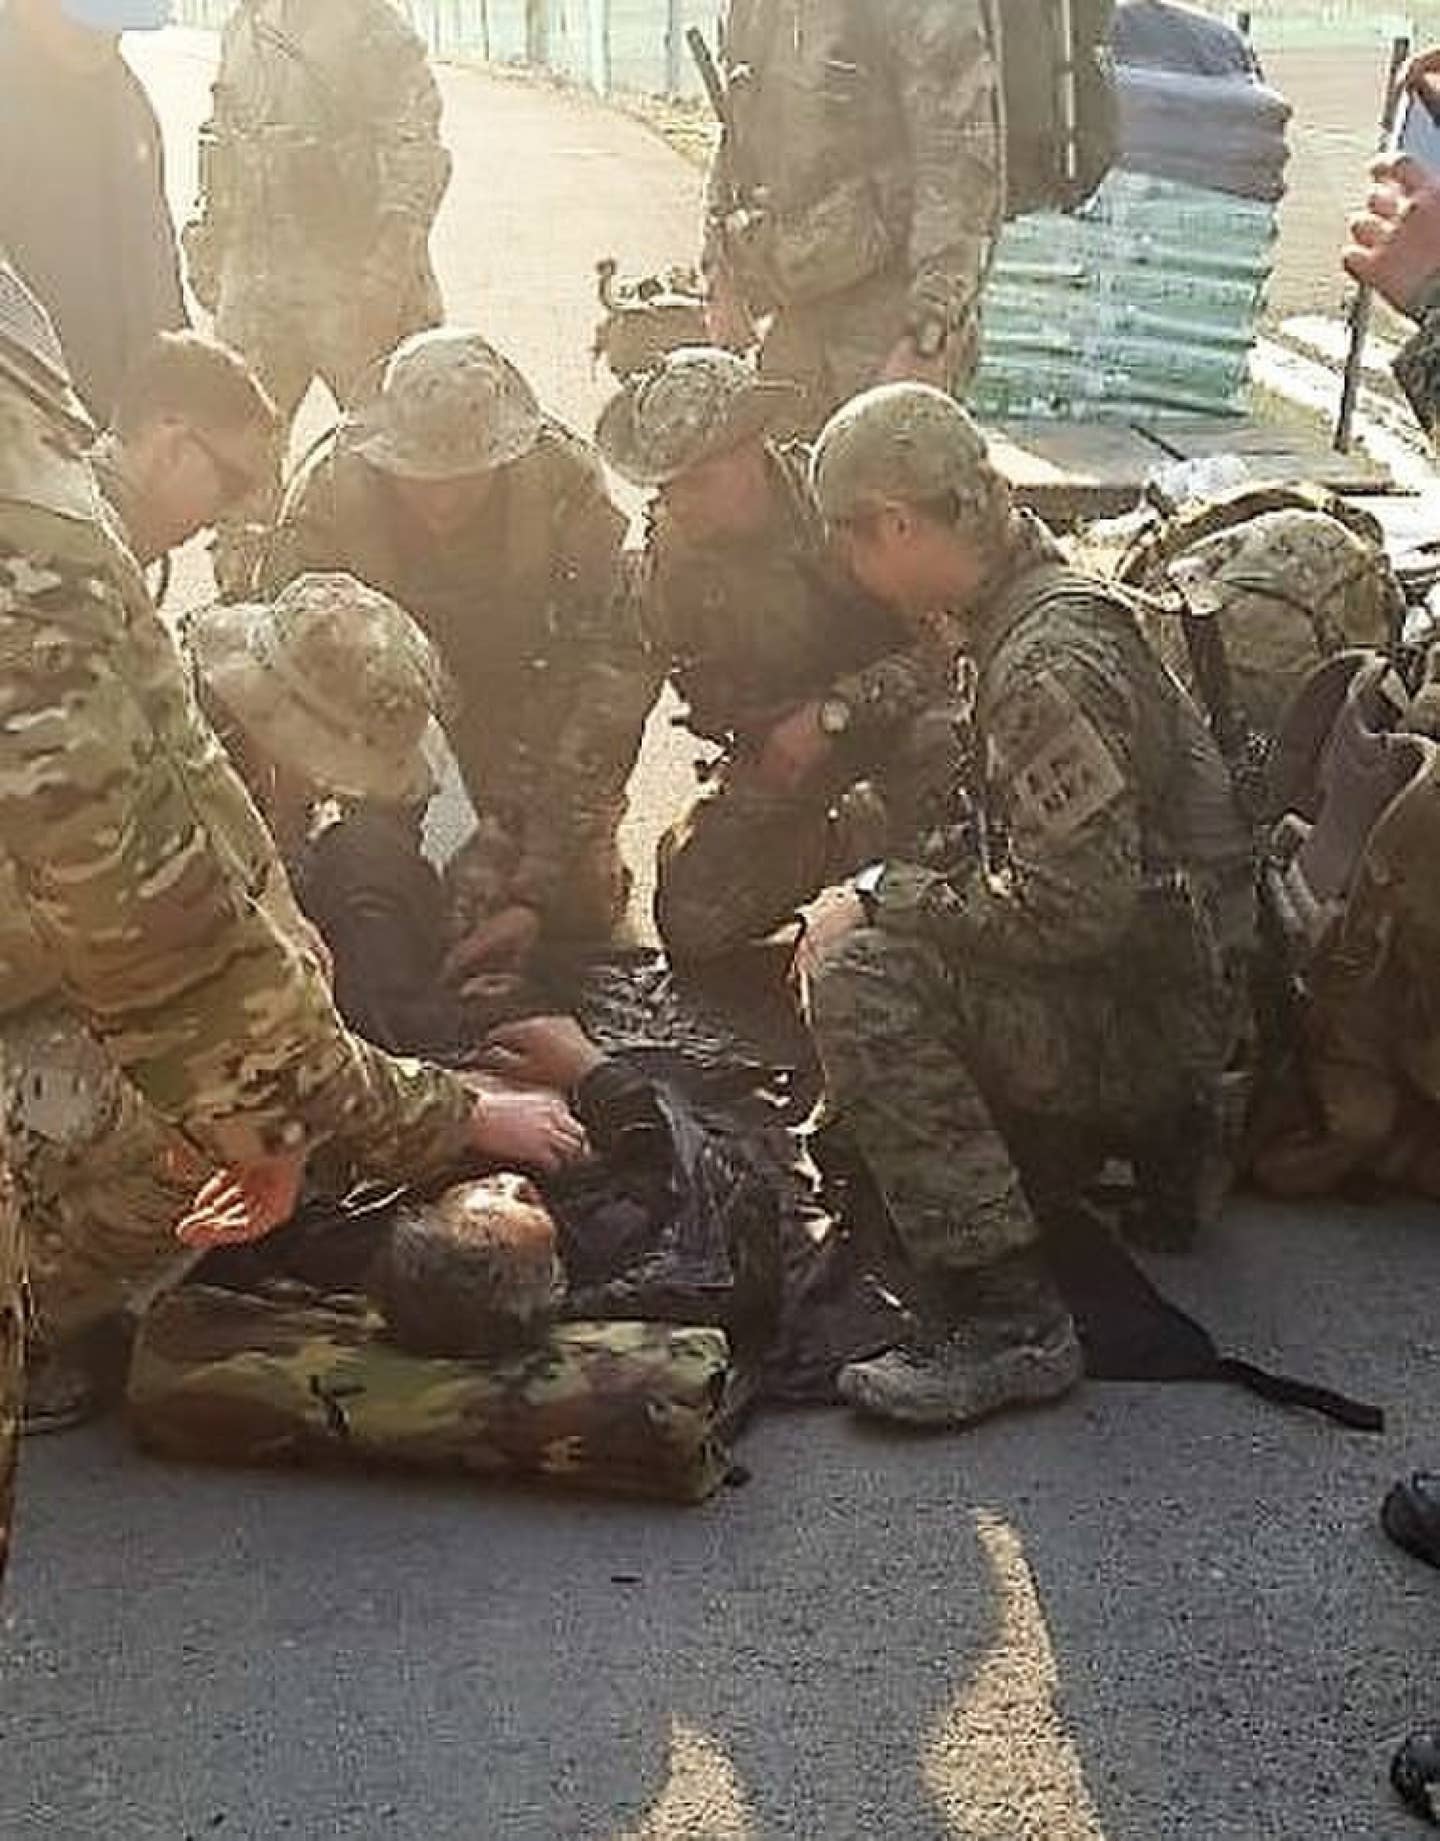 Soldiers from the 1st Special Forces Group (Airborne) and the Republic of Korea Special Forces provide lifesaving emergency care to a Korean farmer.